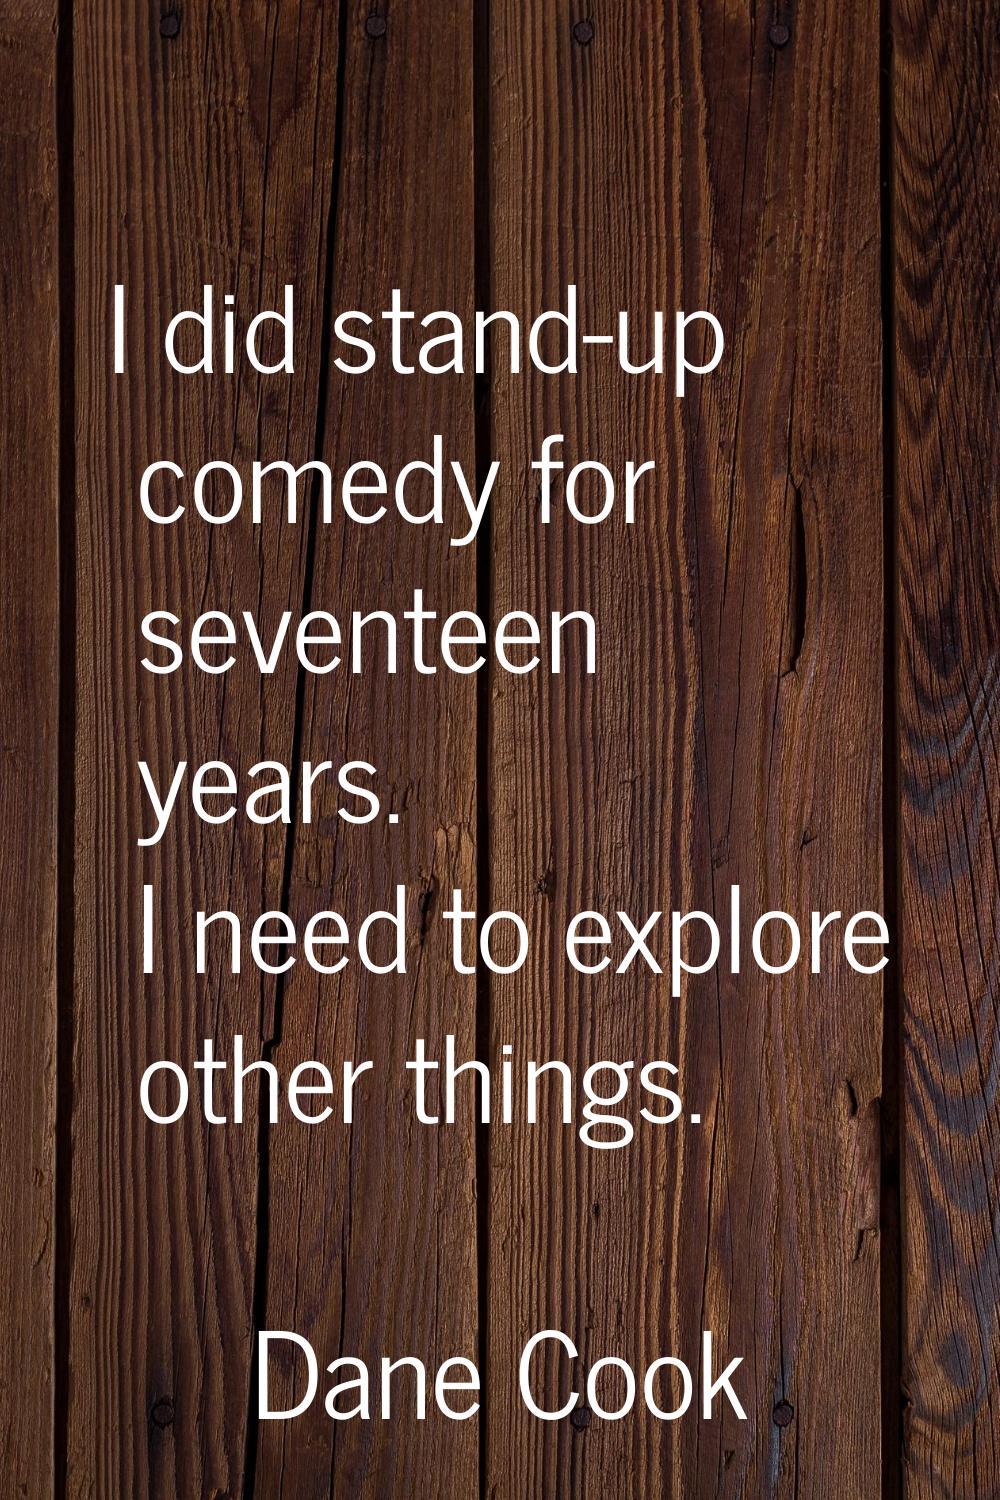 I did stand-up comedy for seventeen years. I need to explore other things.